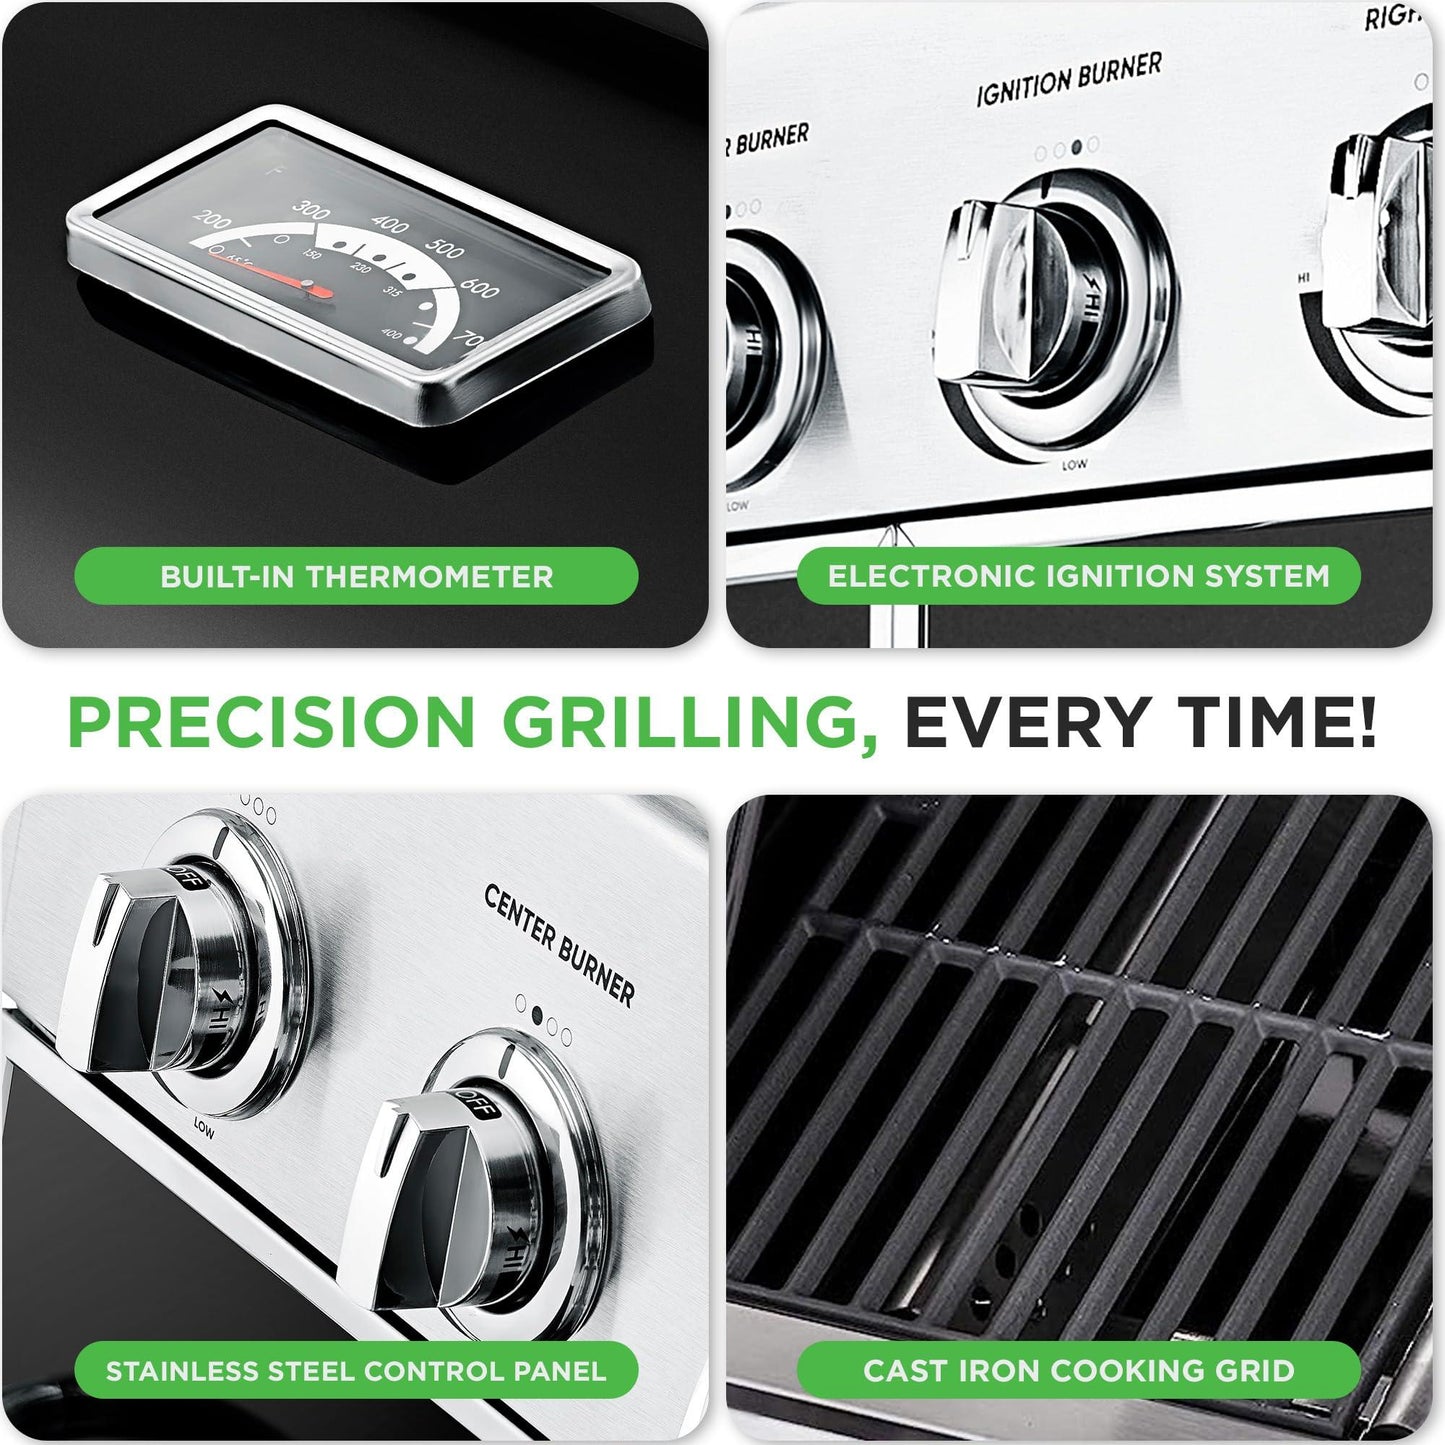 NutriChef Heavy-Duty 5-Burner Propane Gas Grill - Stainless Steel Grill, 4 Main Burner with 1 side burner, 52,000 BTU Grilling Capacity, Electronic Ignition System, Built-in Thermometer - NCGRIL2 - CookCave